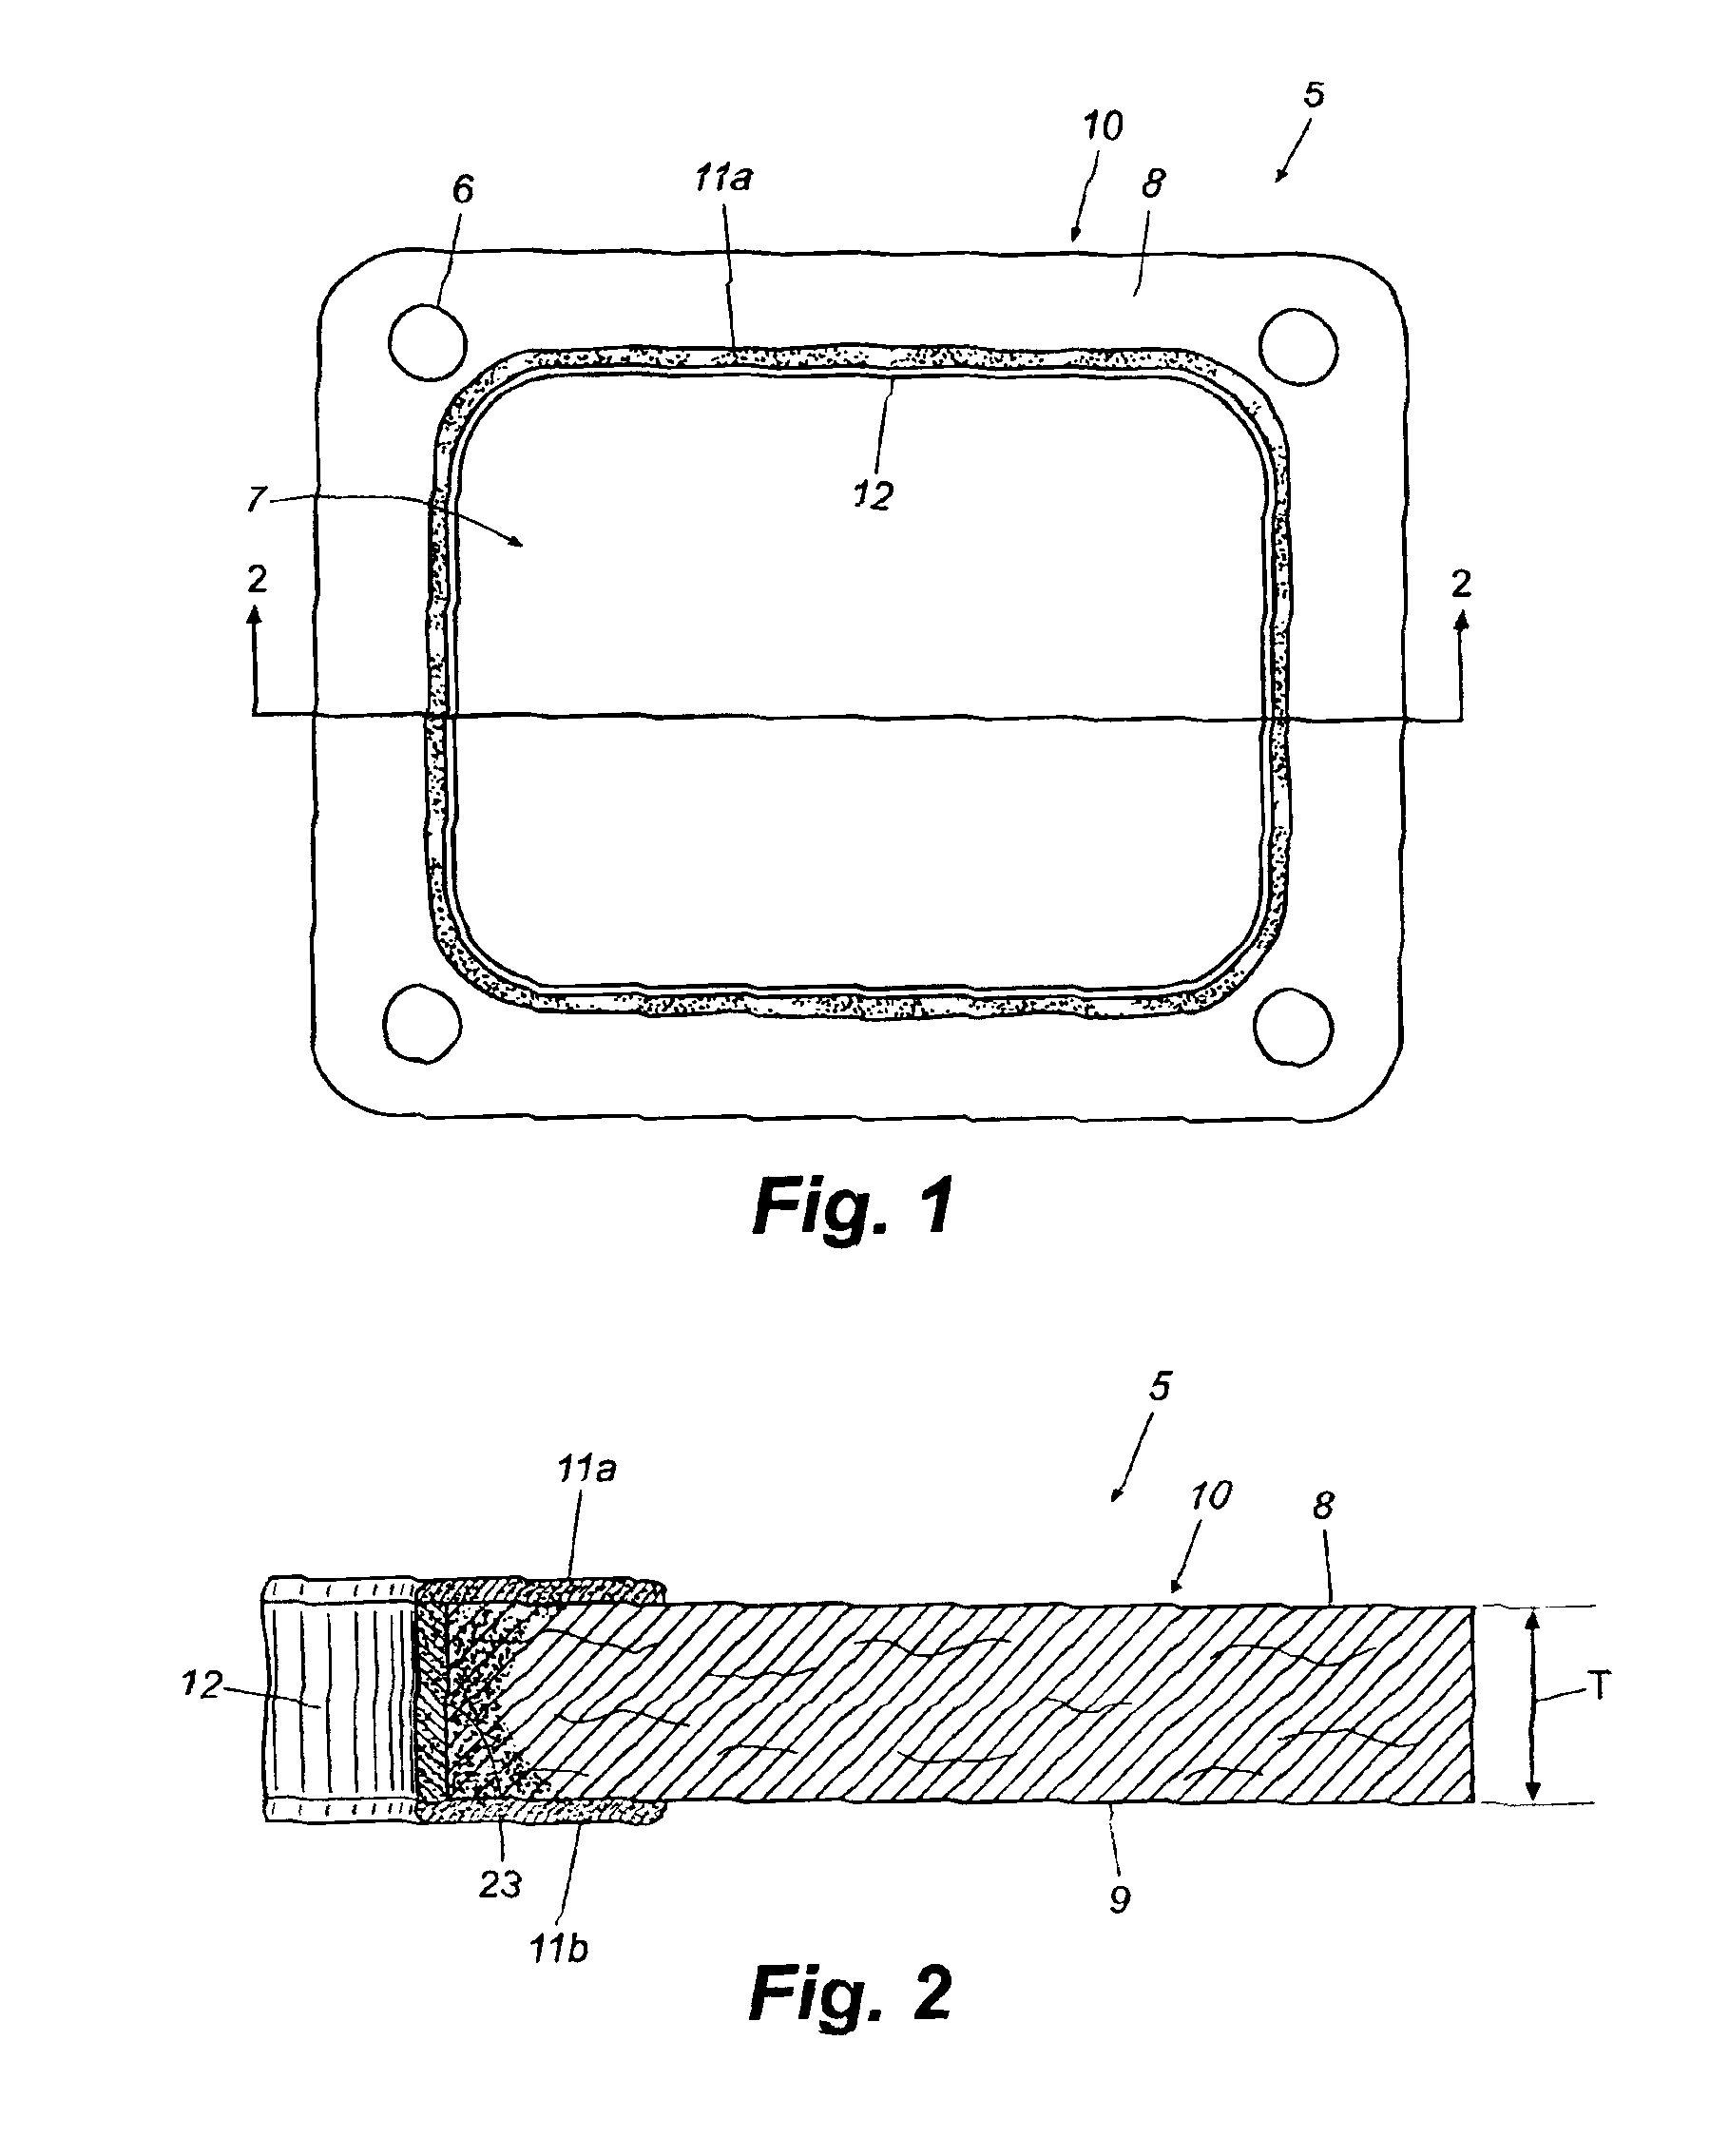 Edge coated gaskets and method of making same